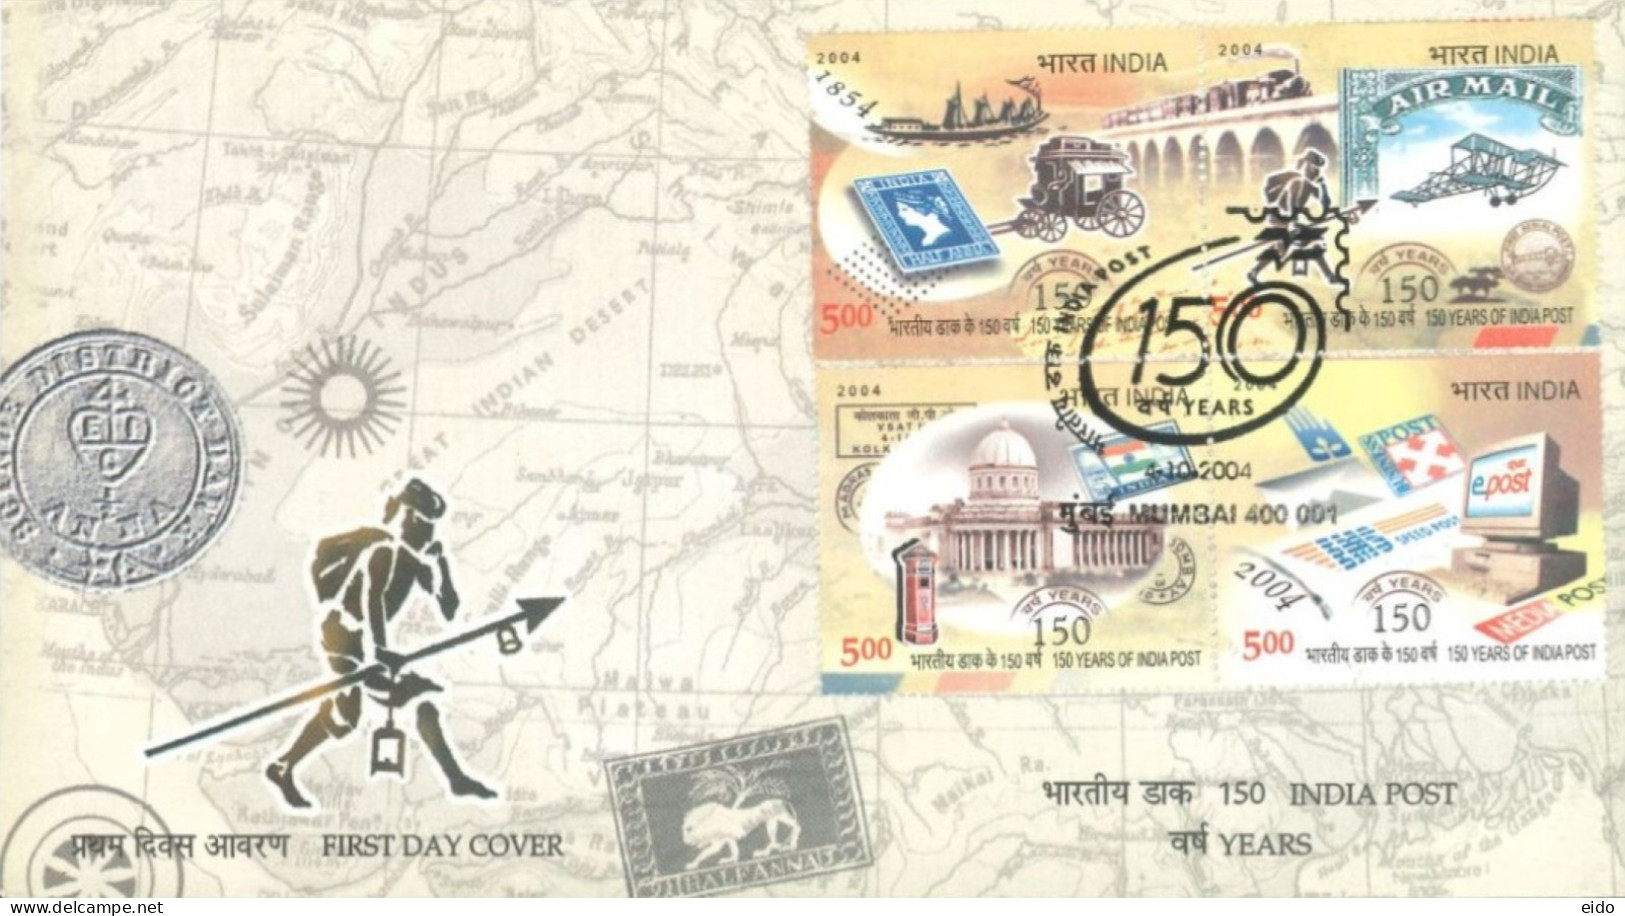 INDIA - 2004 - FDC STAMPS OF 150th ANNIVERSARY OF INDIA POST. - Briefe U. Dokumente